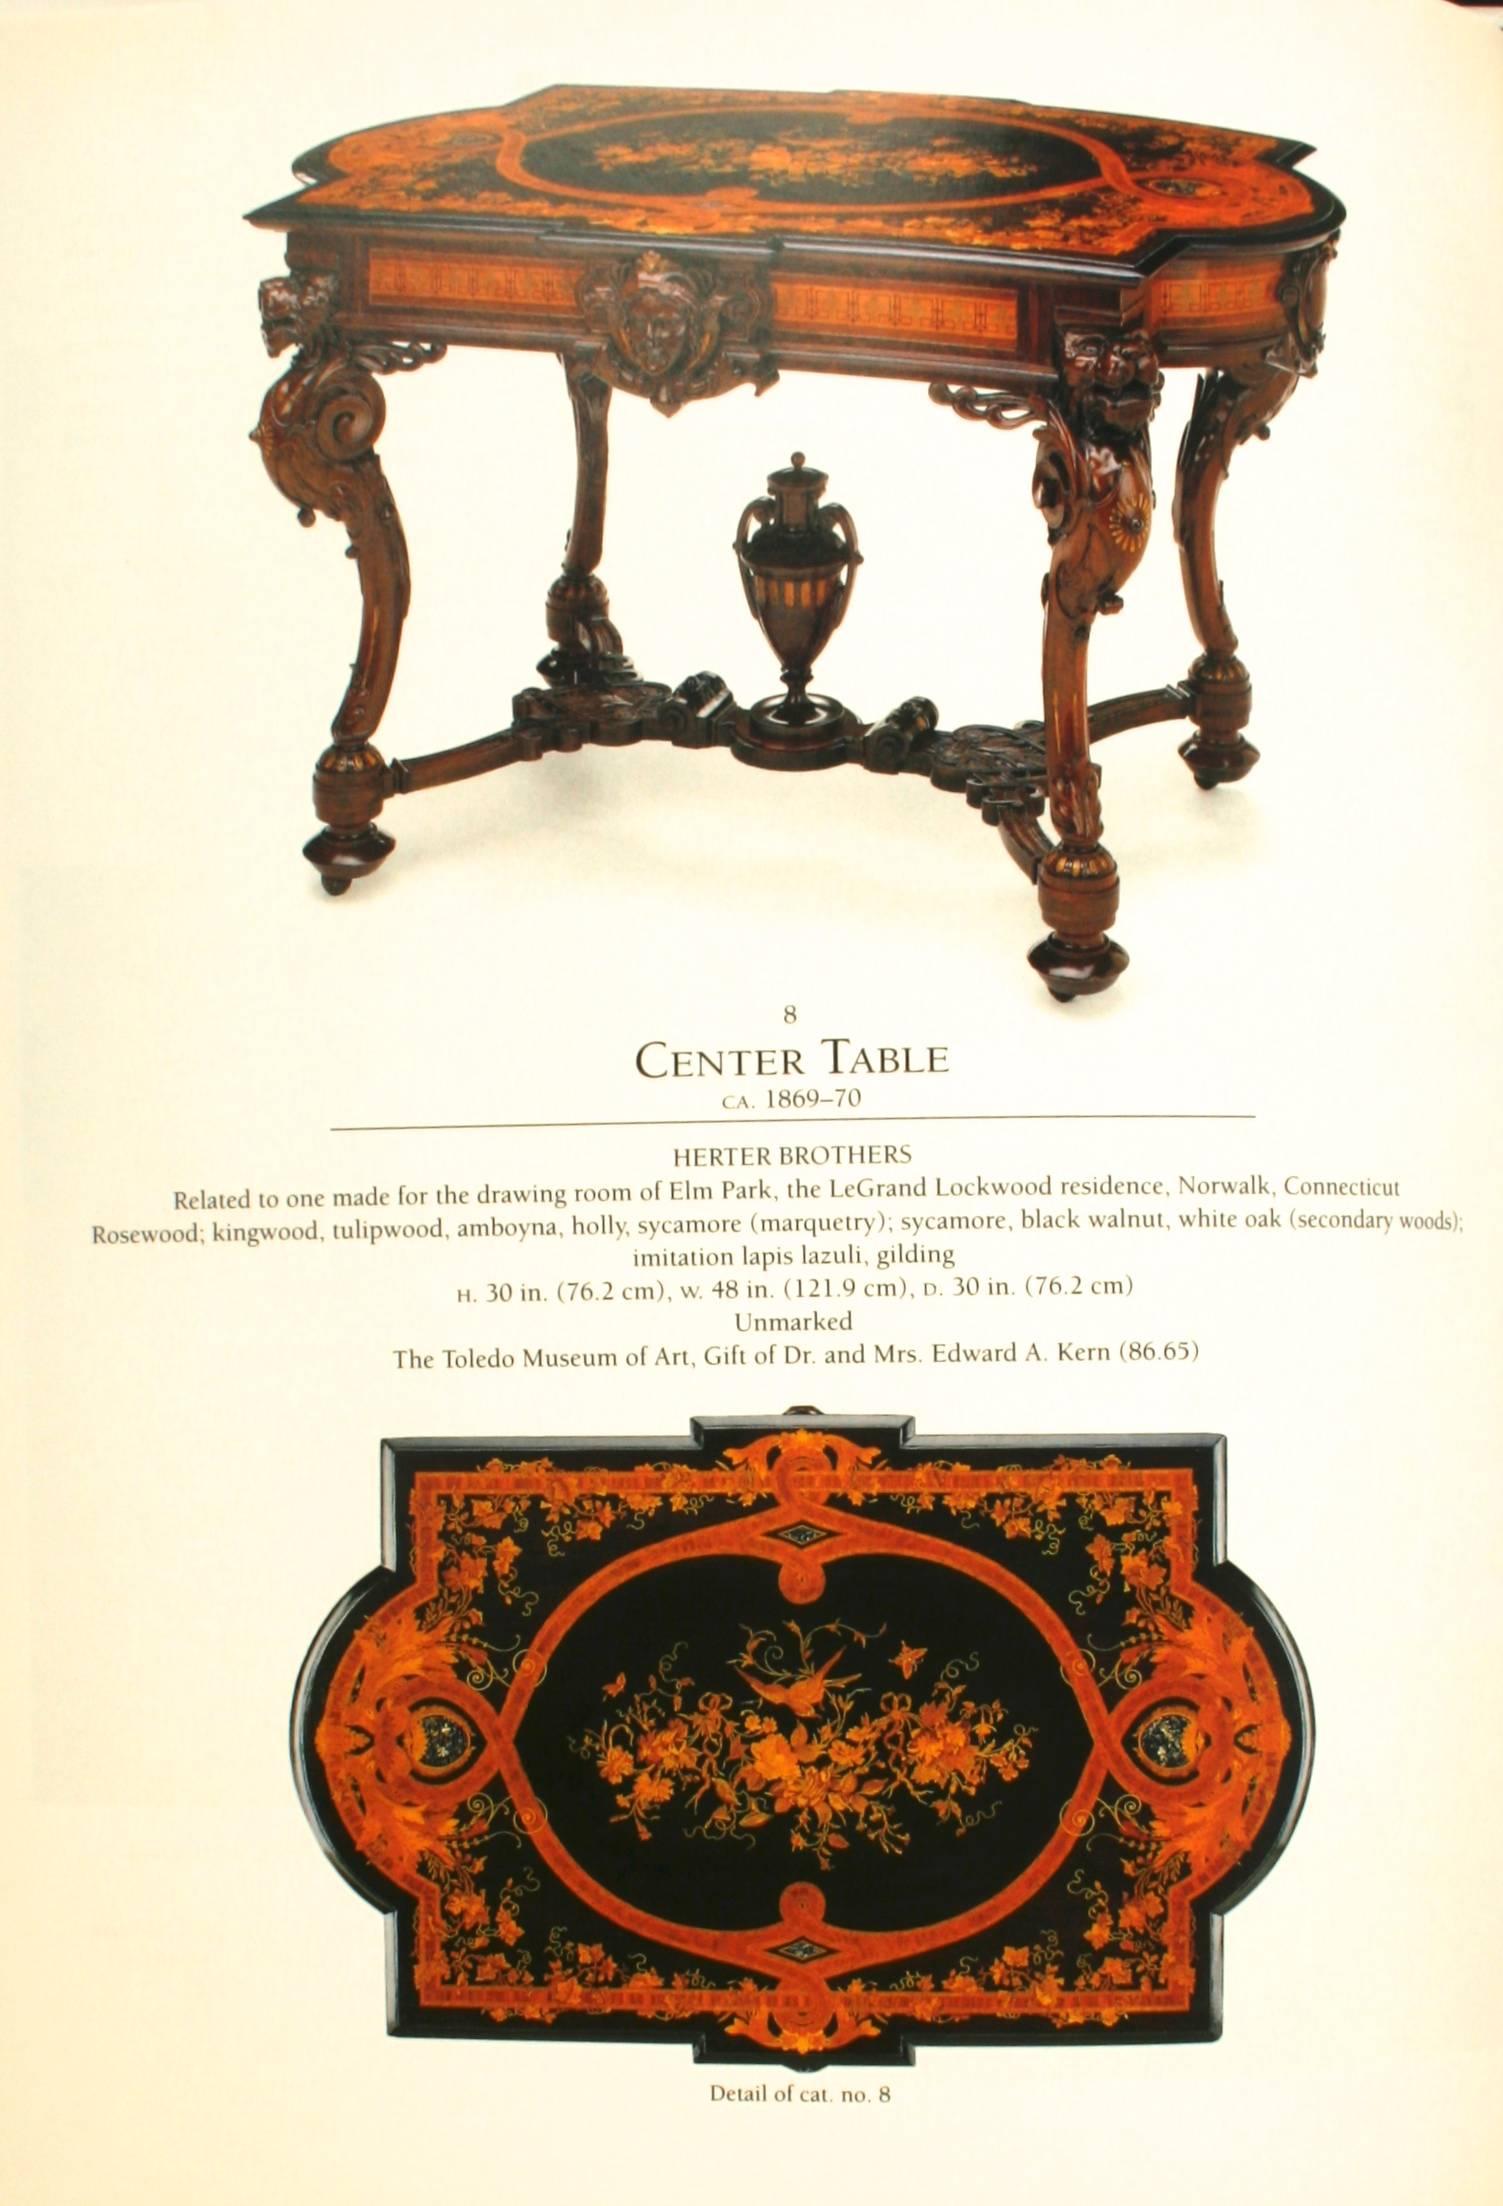 Paper ‘Herter Brothers, Furniture and Interiors for a Gilded Age’ First Edition